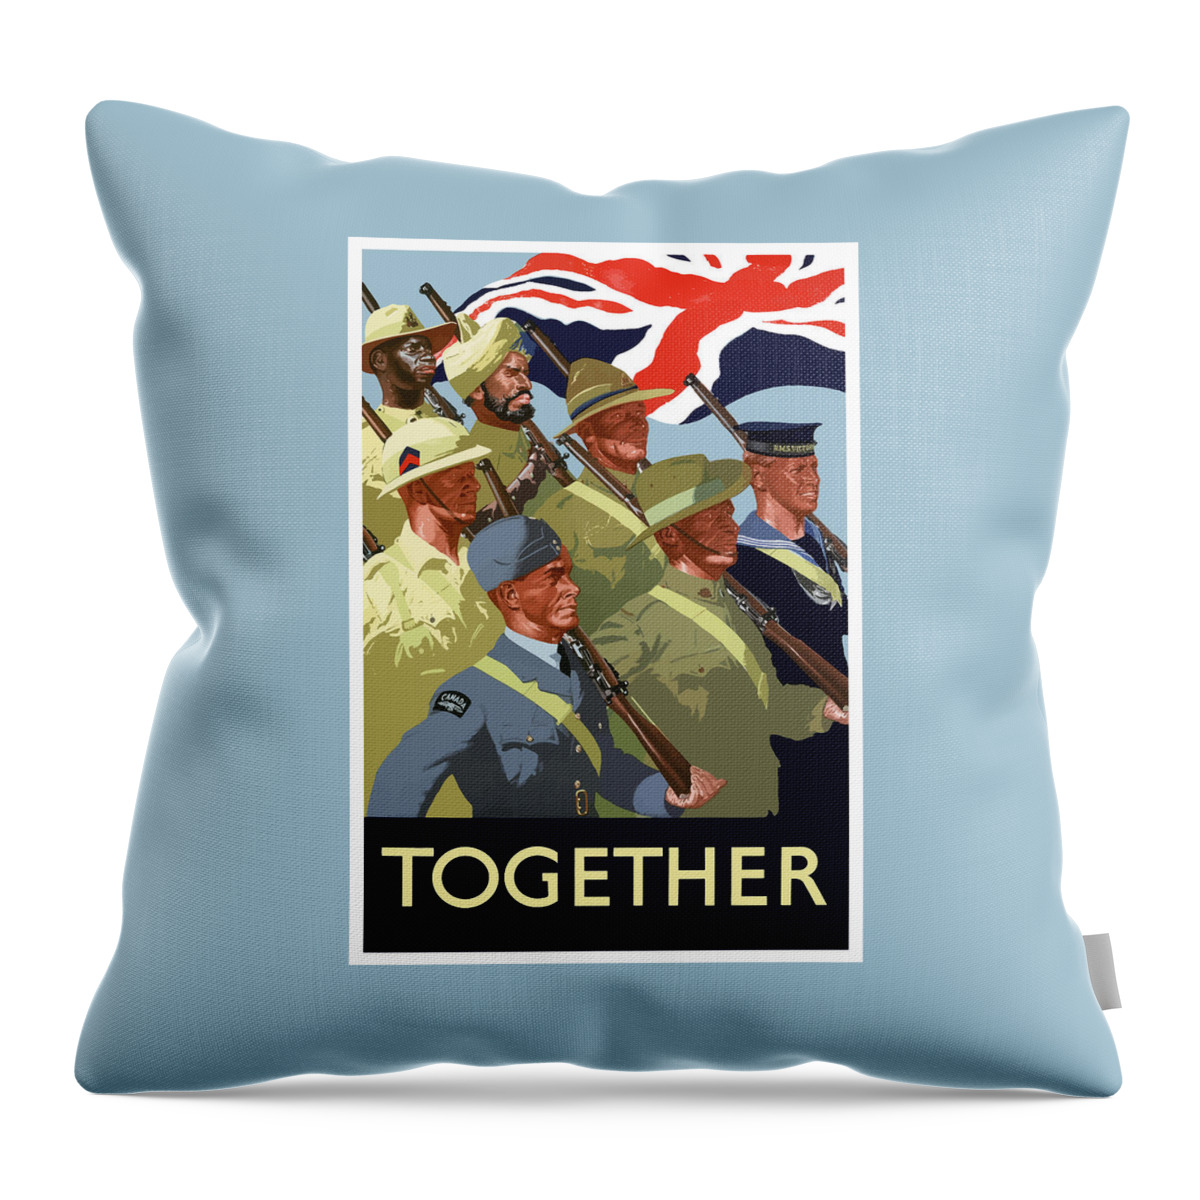 Union Flag Throw Pillow featuring the painting British Empire Soldiers Together by War Is Hell Store